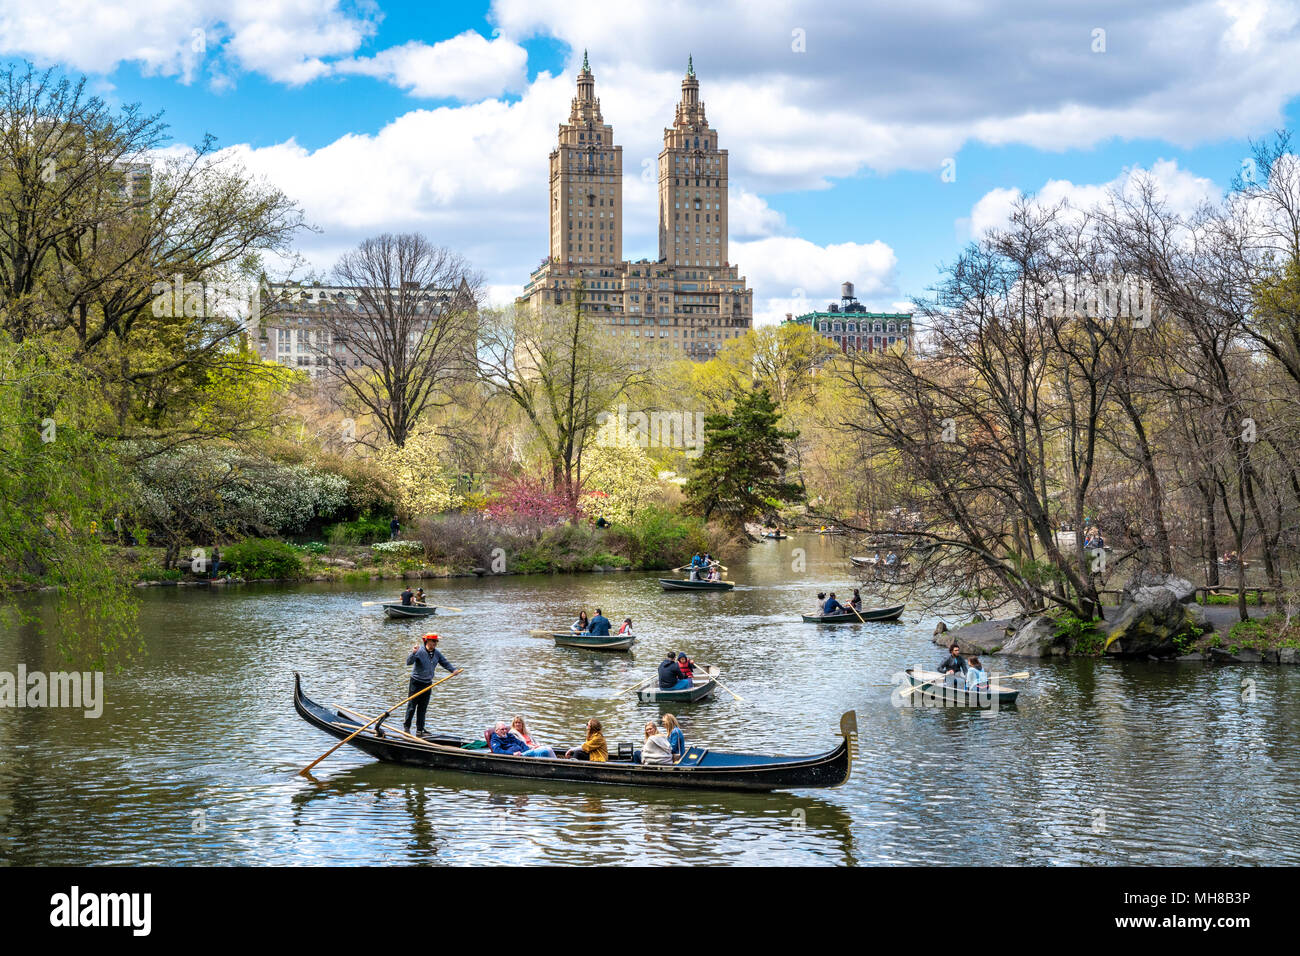 New York, USA, 29 April 2018. Tourist enjoy boat rides and even a gondola in New York's Central Park.  The iconic San Remo building is seen in the bac Stock Photo